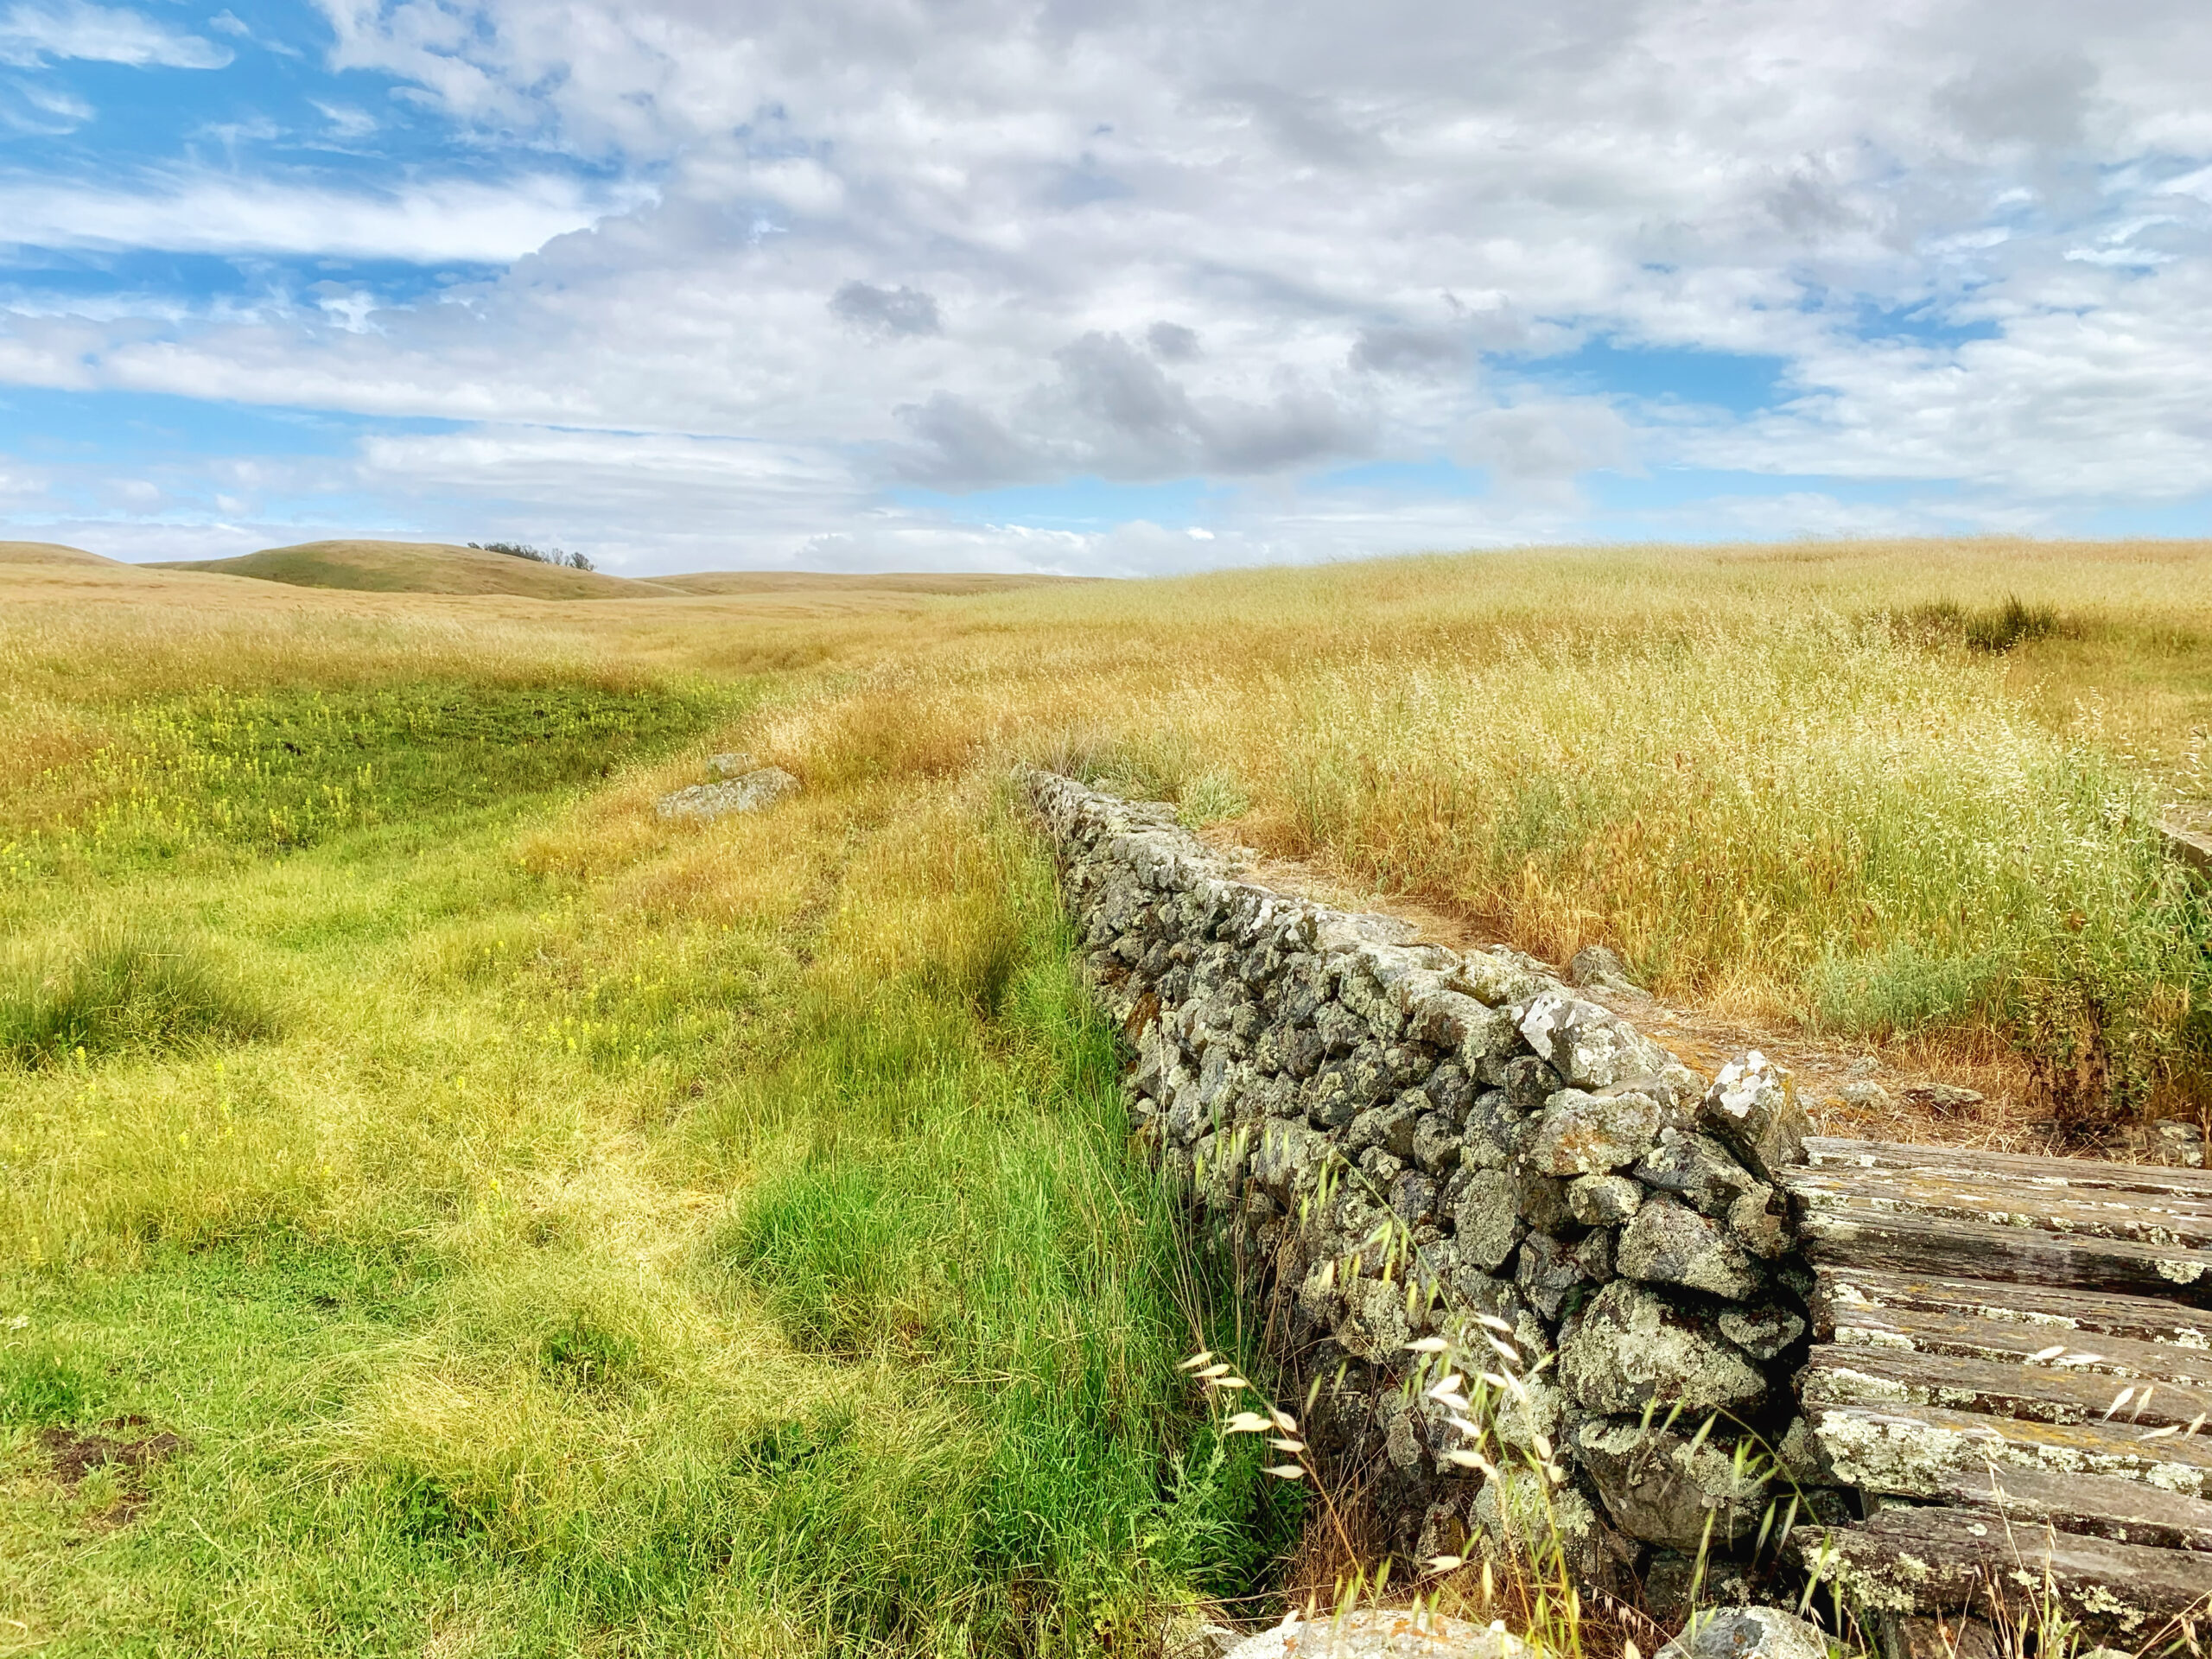 A stone wall in the middle of a grassy field.